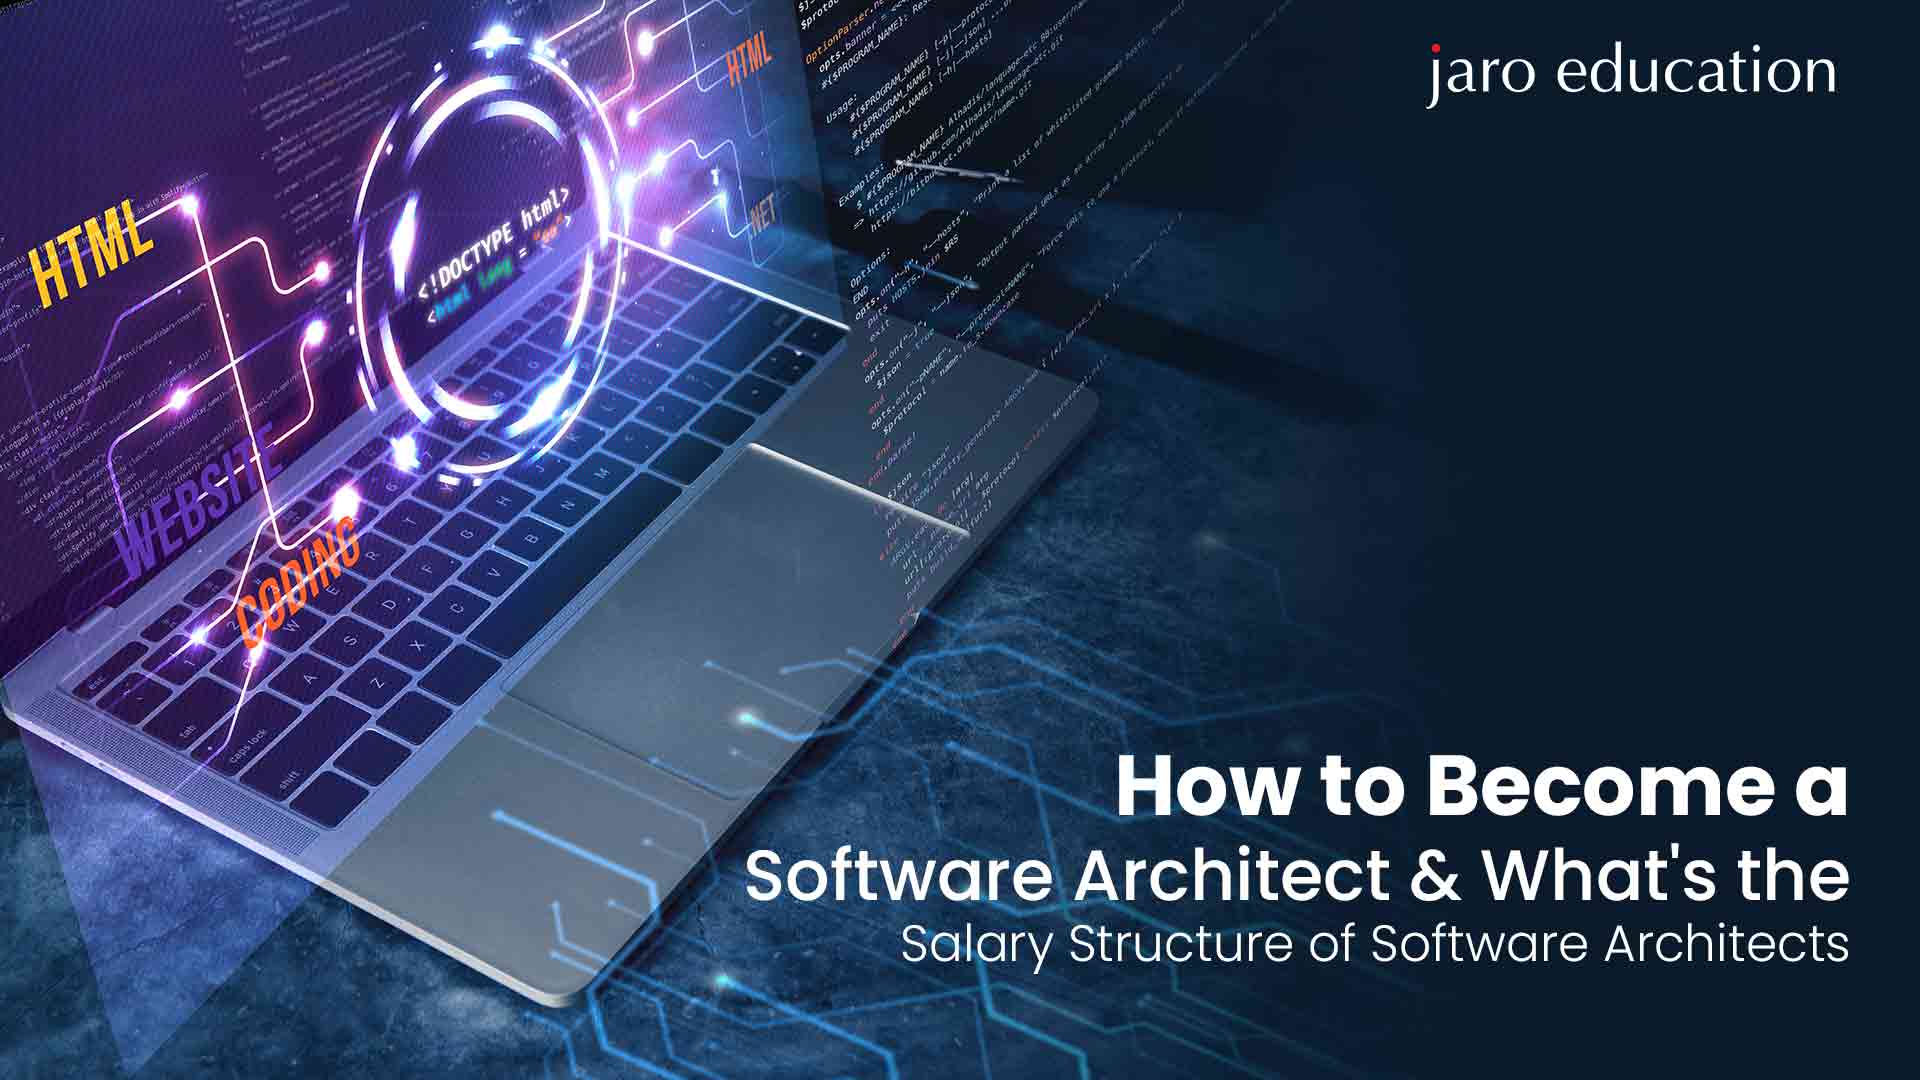 How to Become a Software Architect & What's the Salary Structure of Software Architects